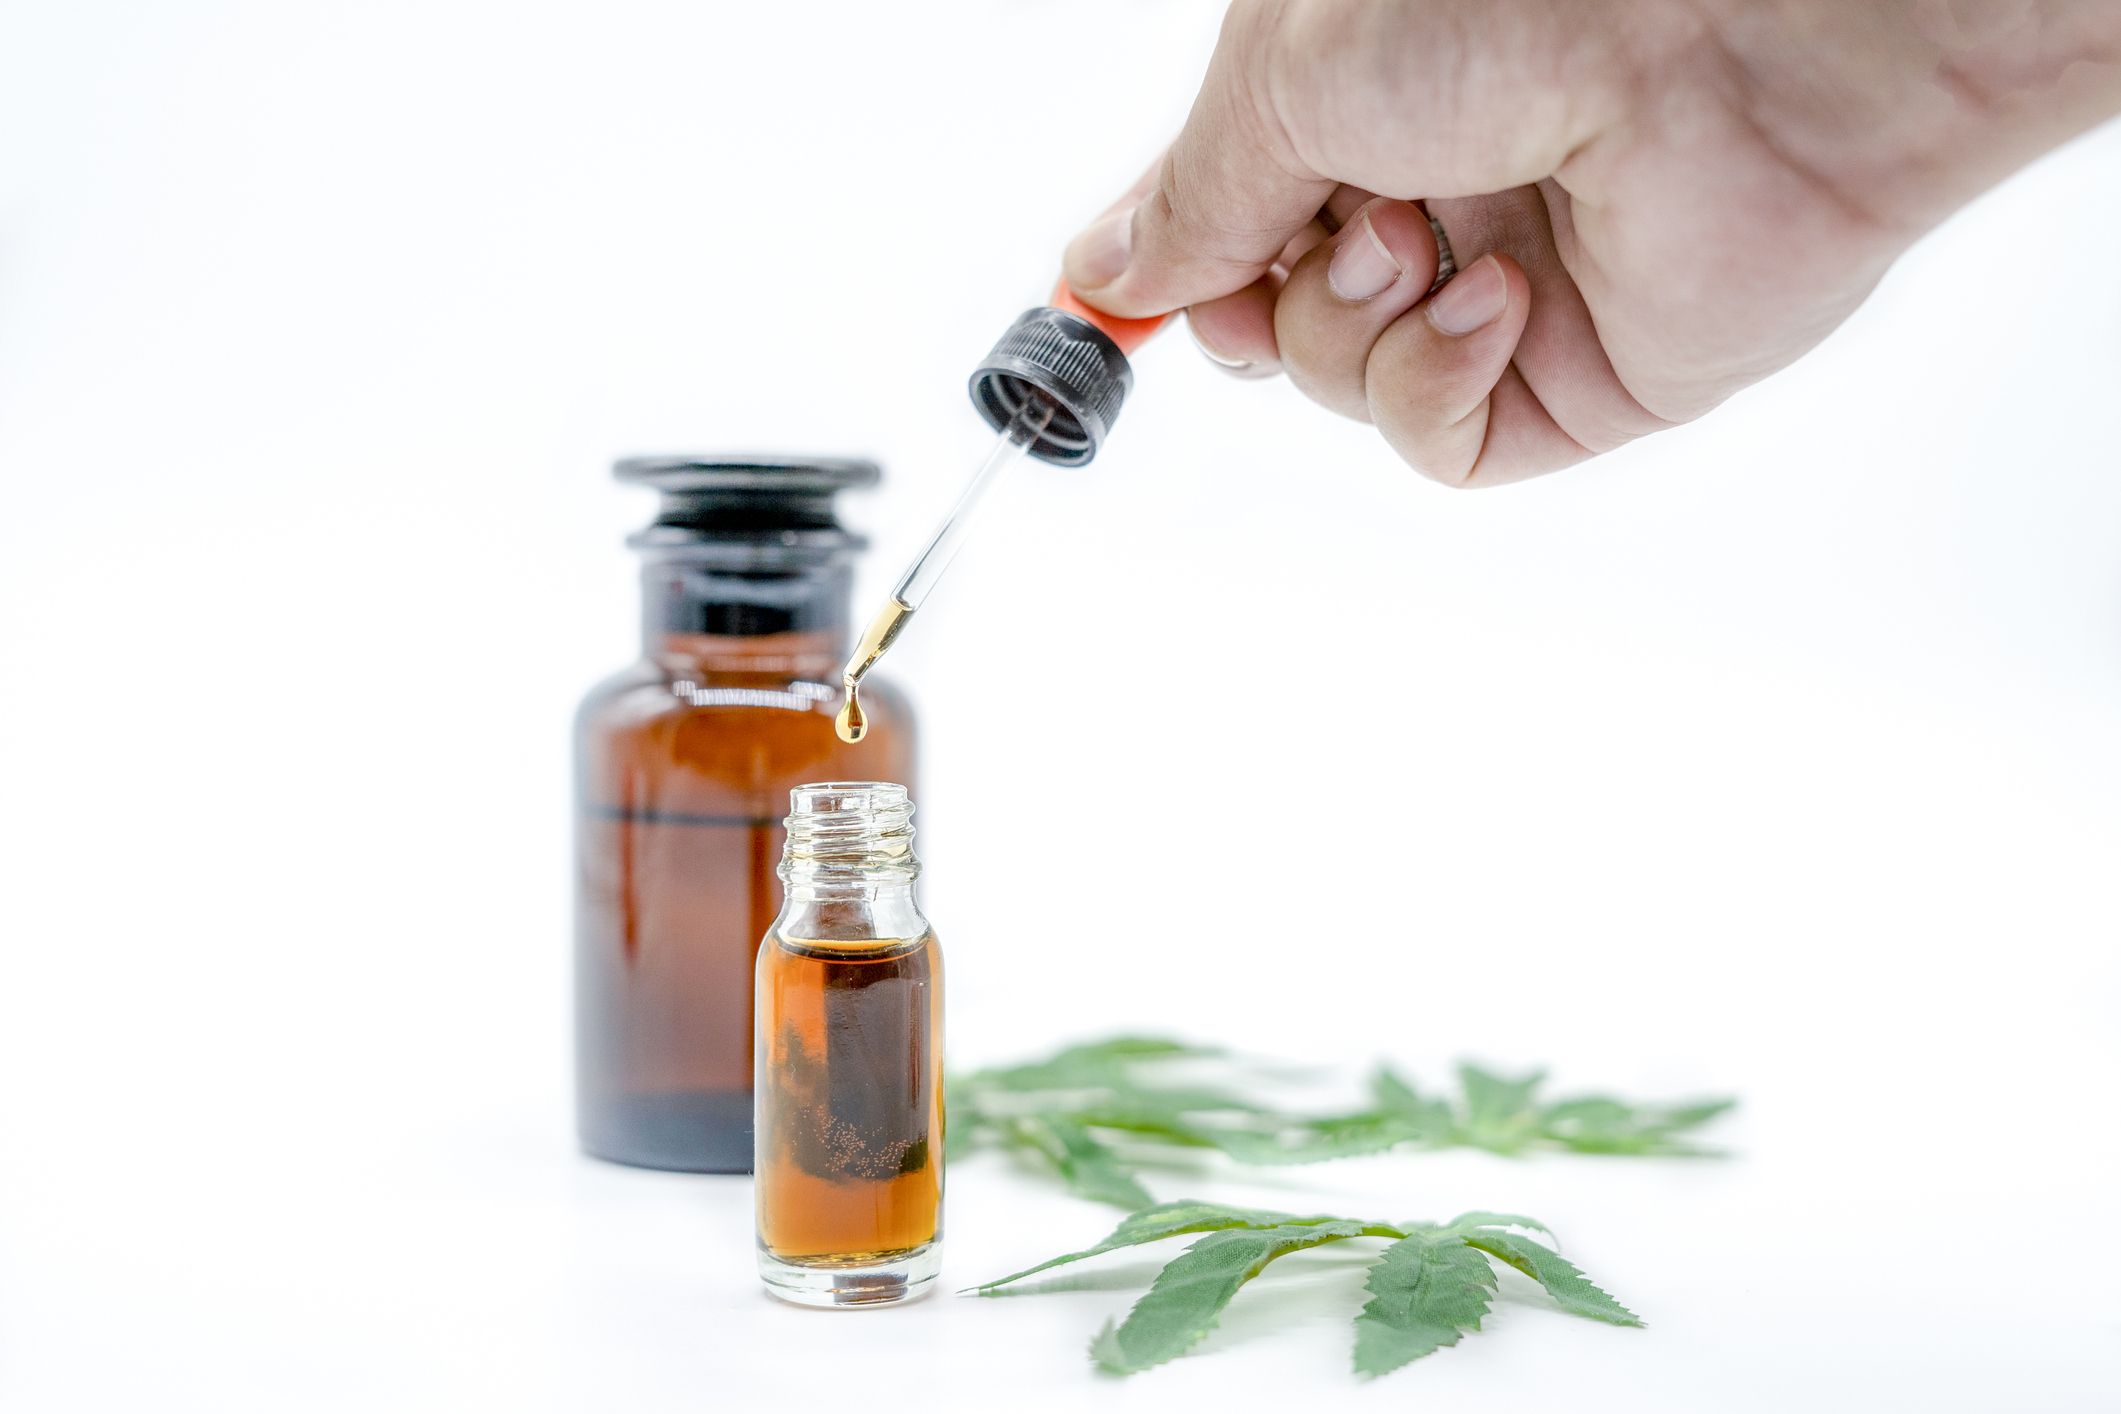 hand-holding-bottle-of-cannabis-oil-in-n